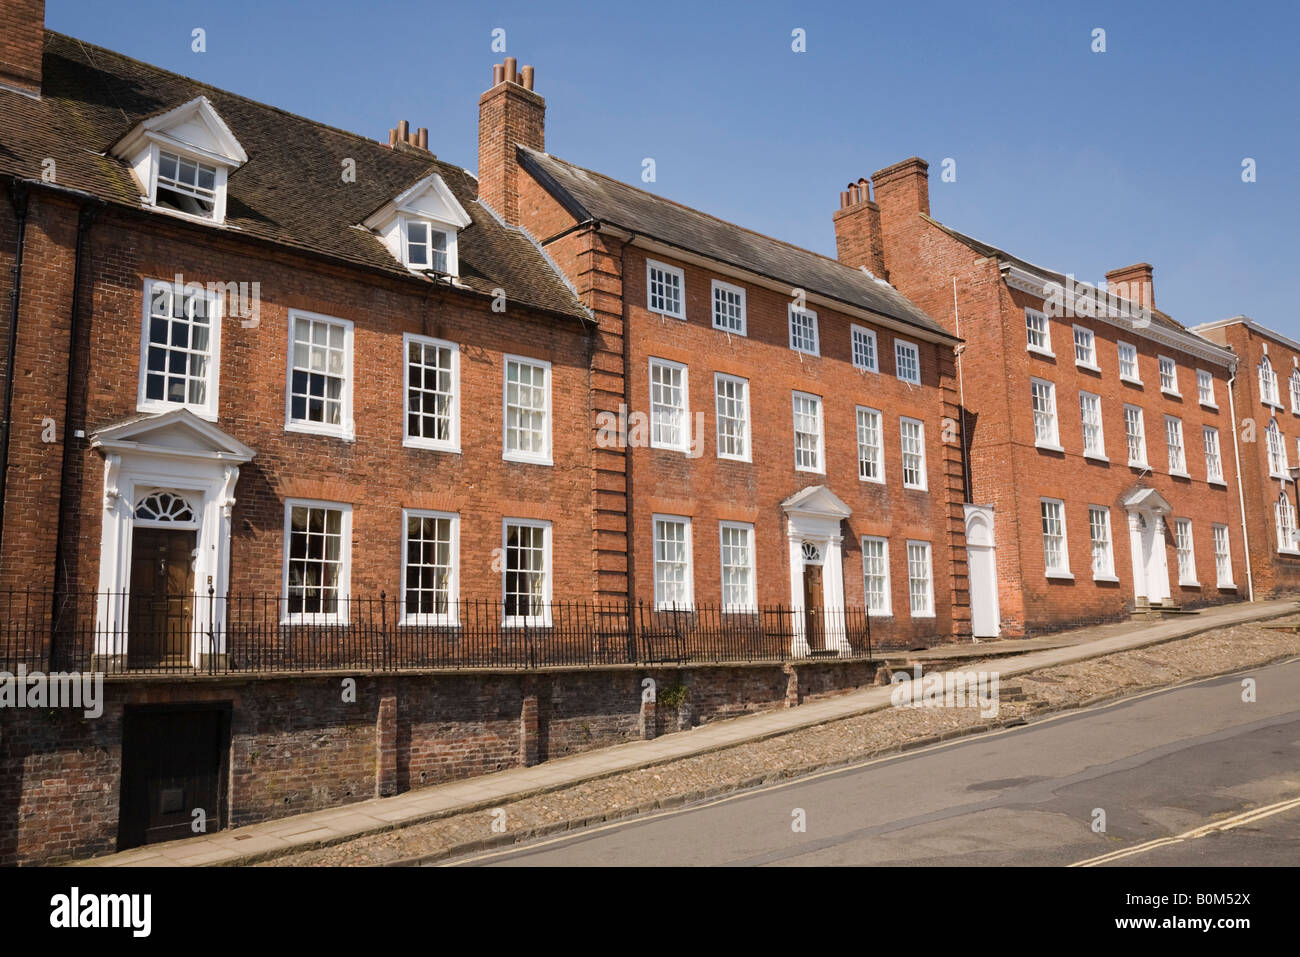 Row of elegant old buildings in Broad Street in historic town. Ludlow Shropshire England UK Great Britain Stock Photo